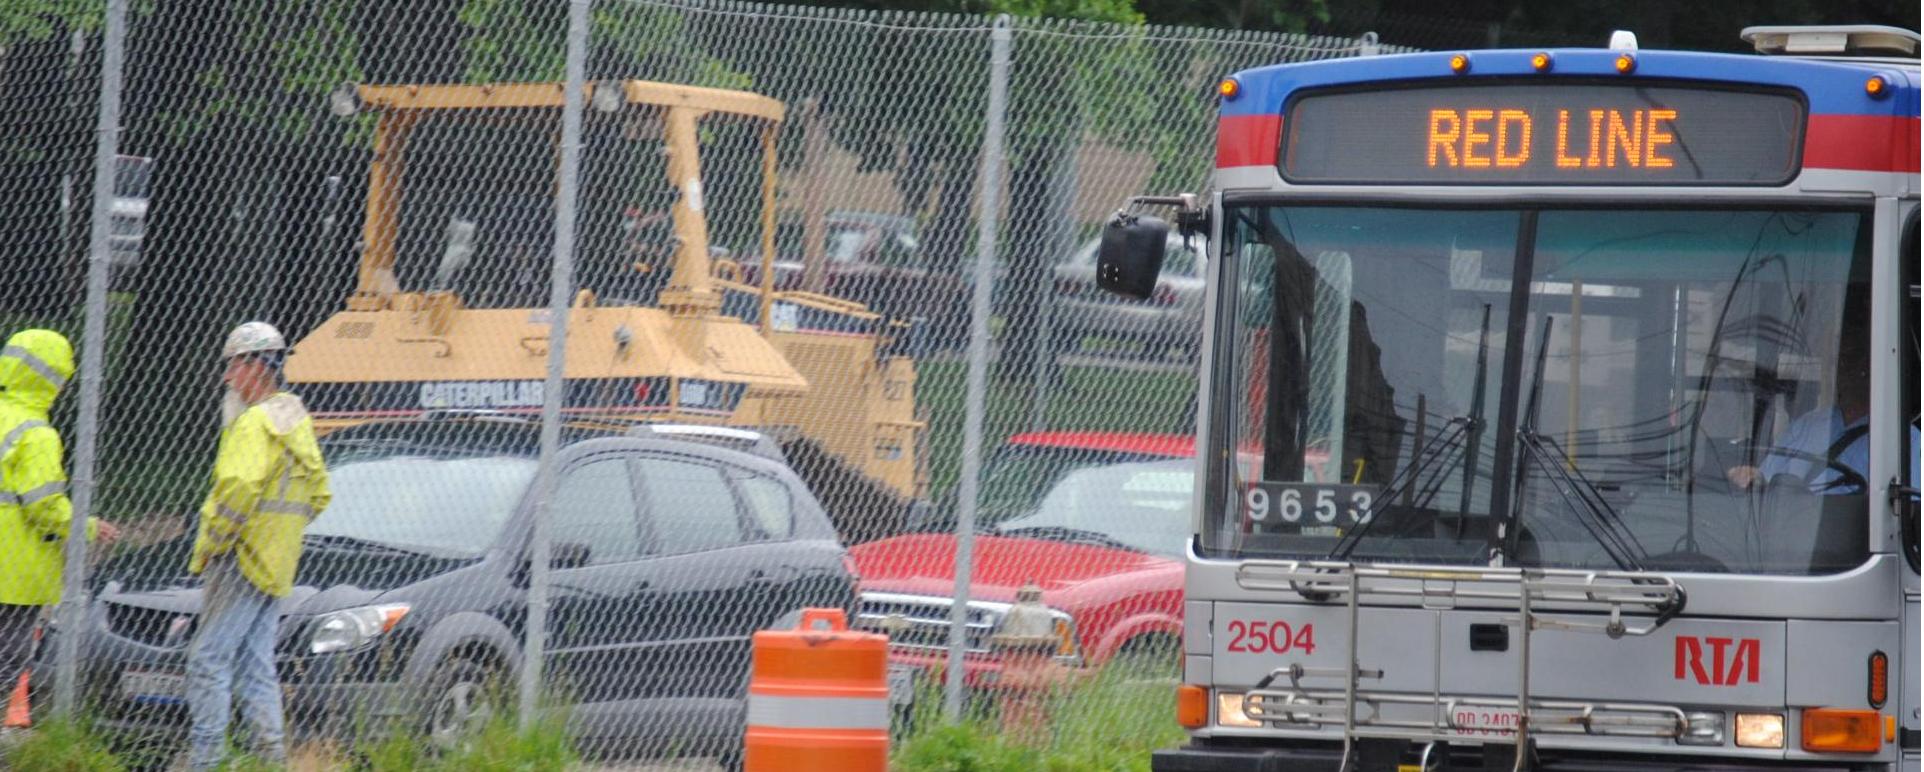  June 9-22: Buses replace rail on East Side for Rapid Station construction